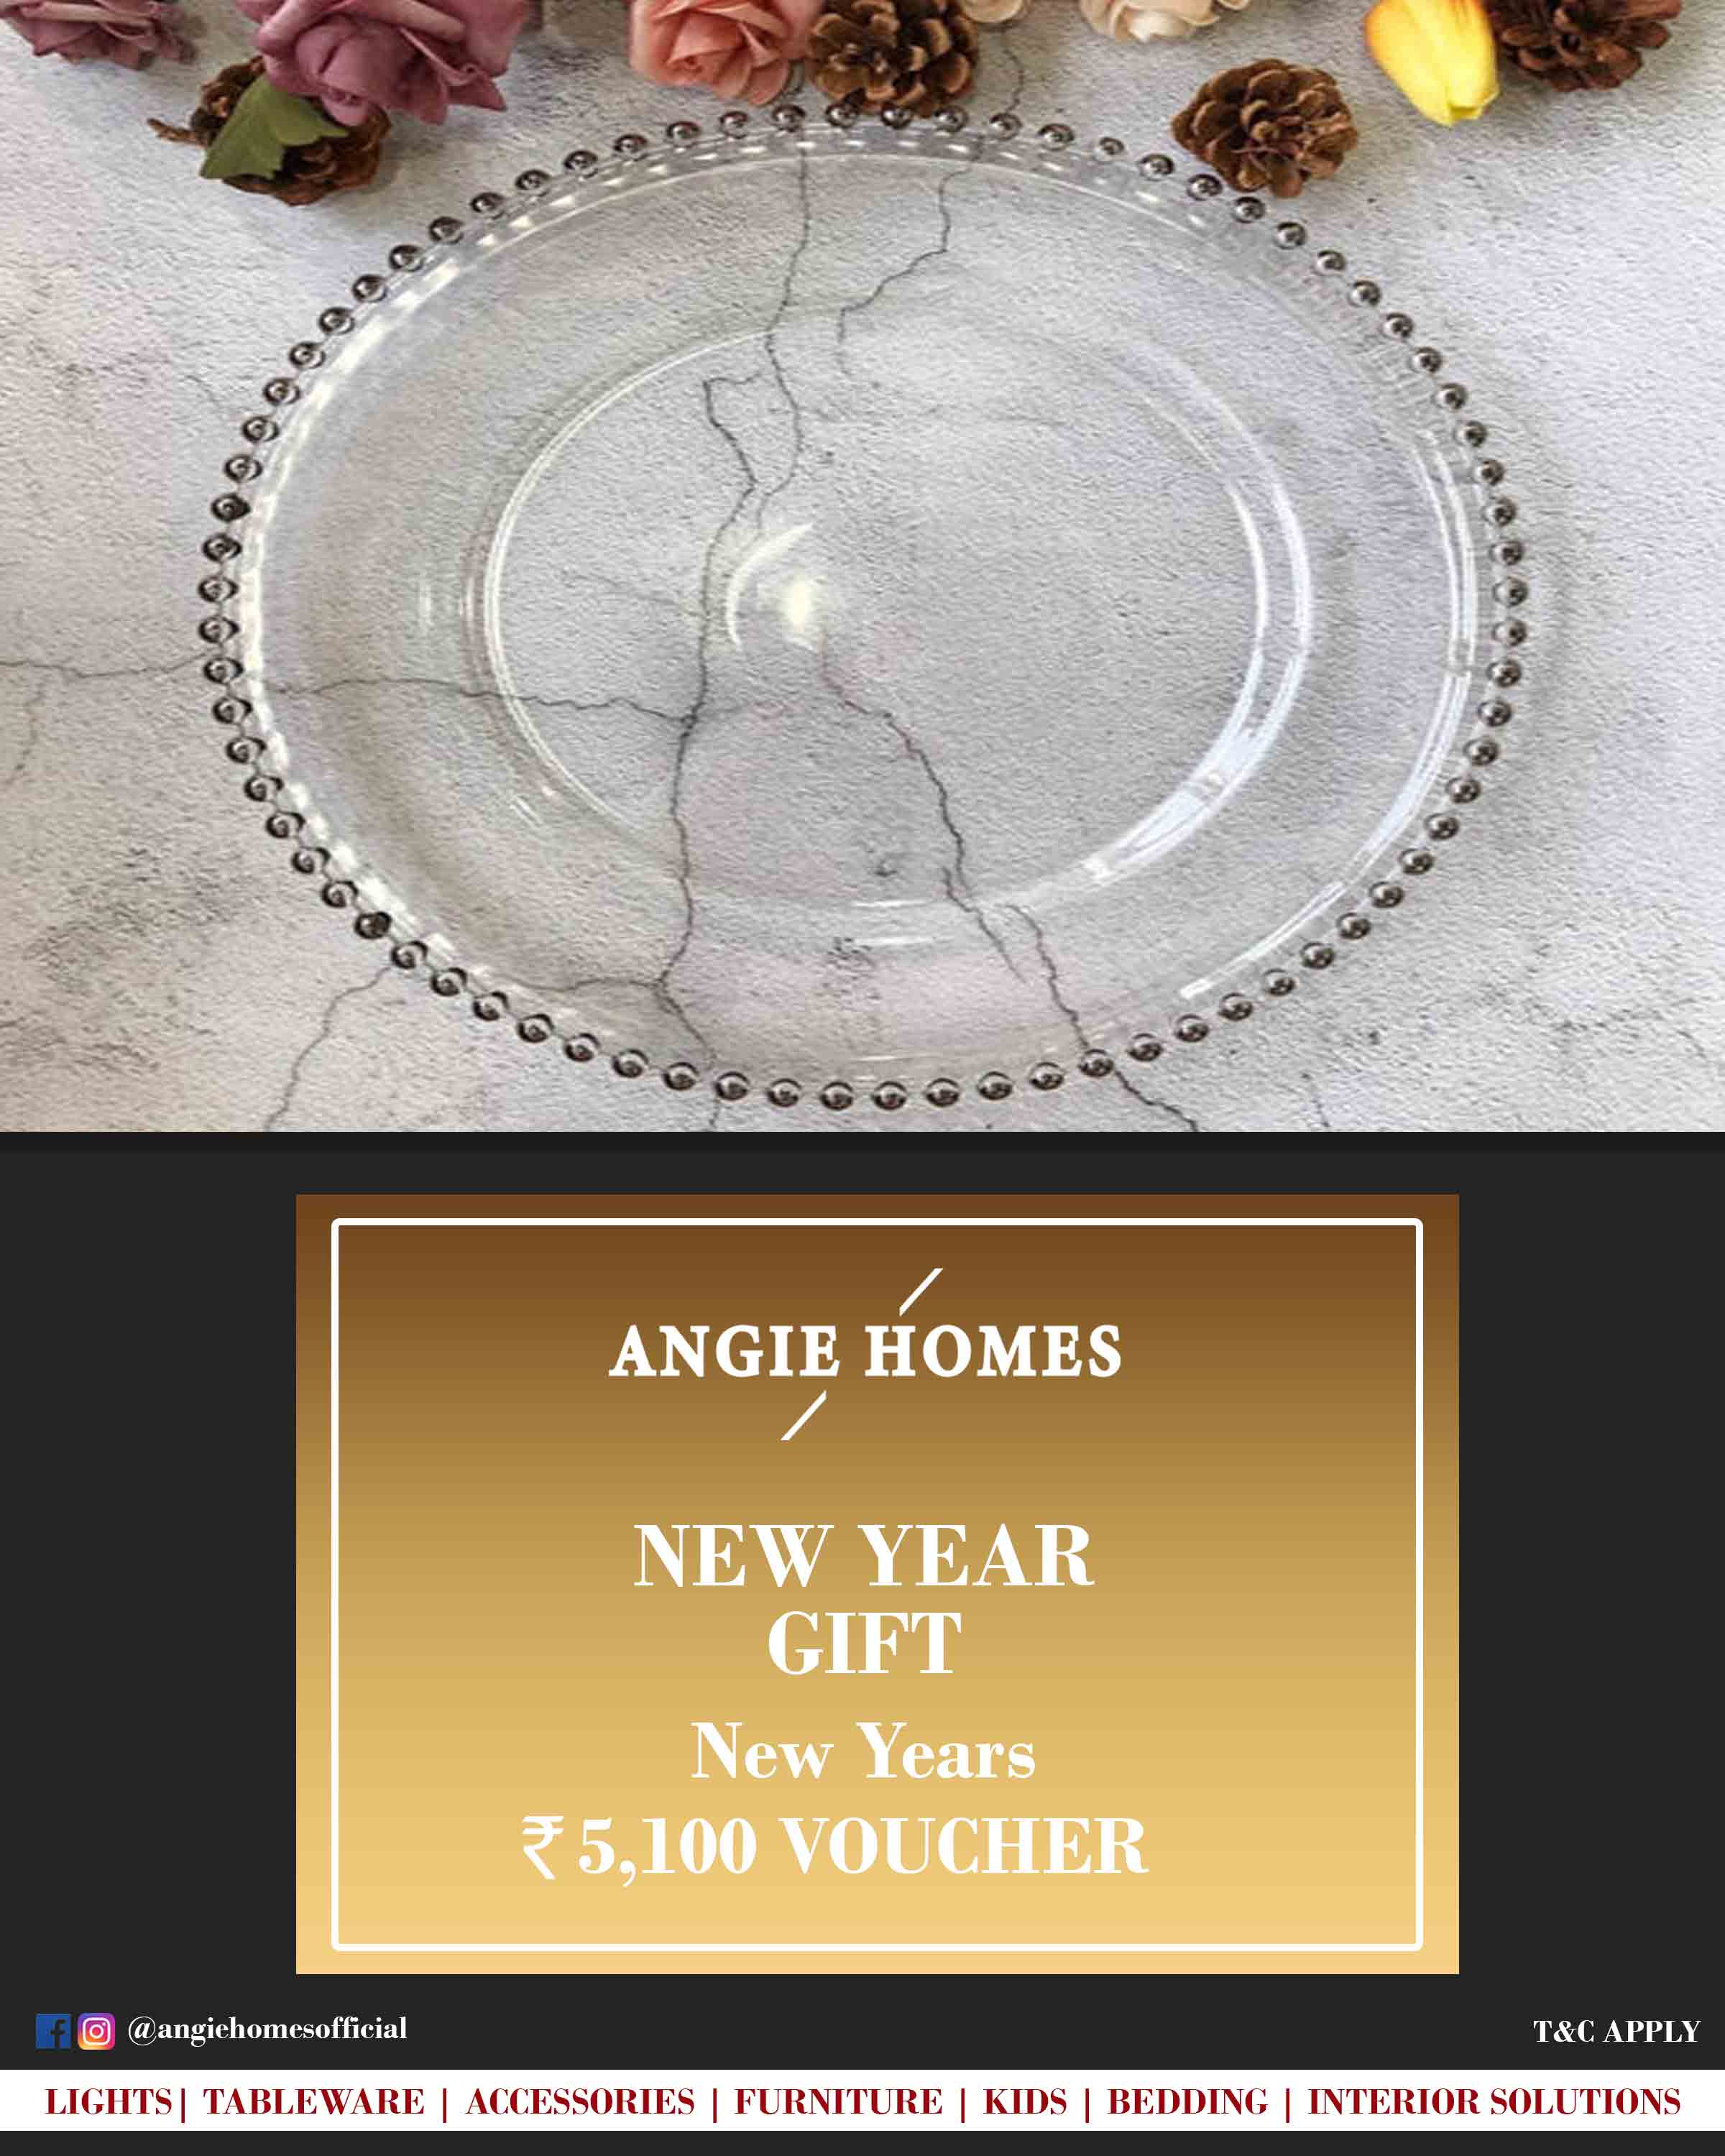 Online New Year Gift Voucher for Tableware | Transparent Plates ANGIE HOMES